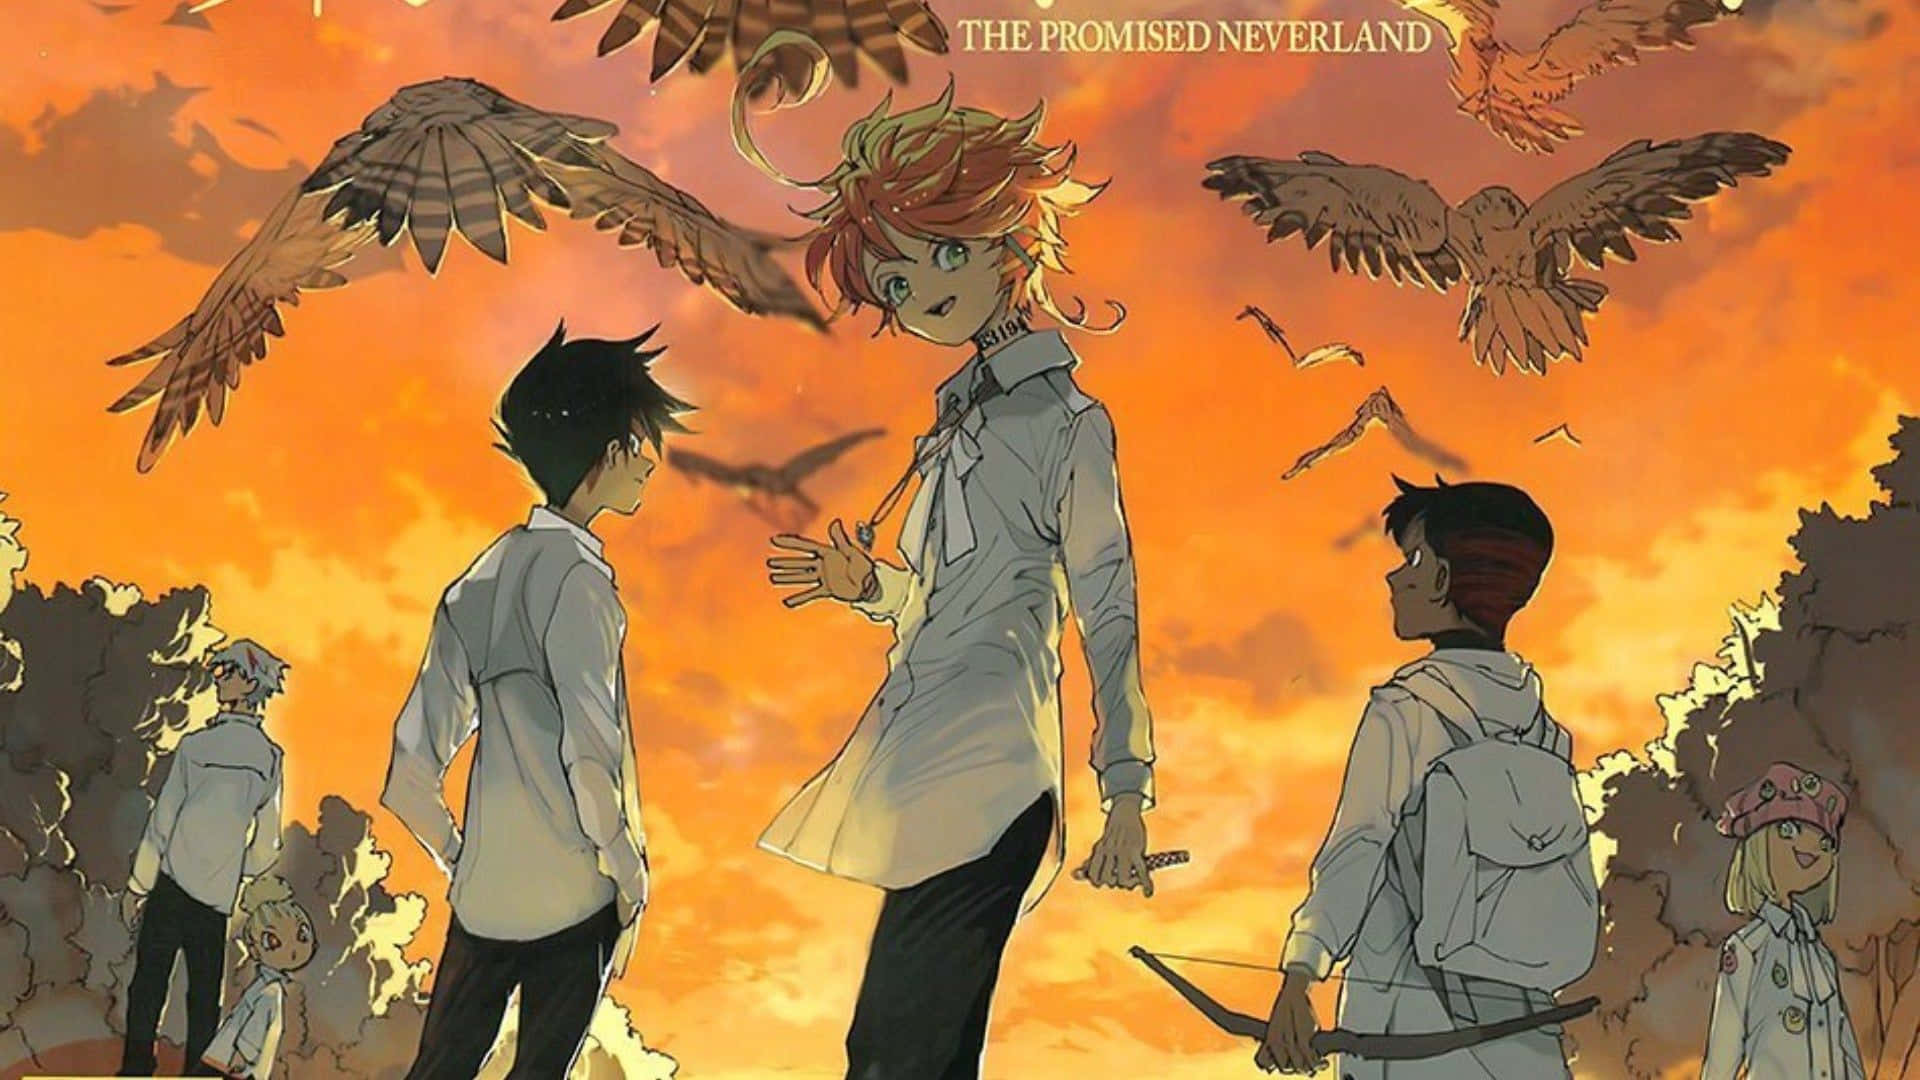 The Promised Neverland Cast under a Starry Sky